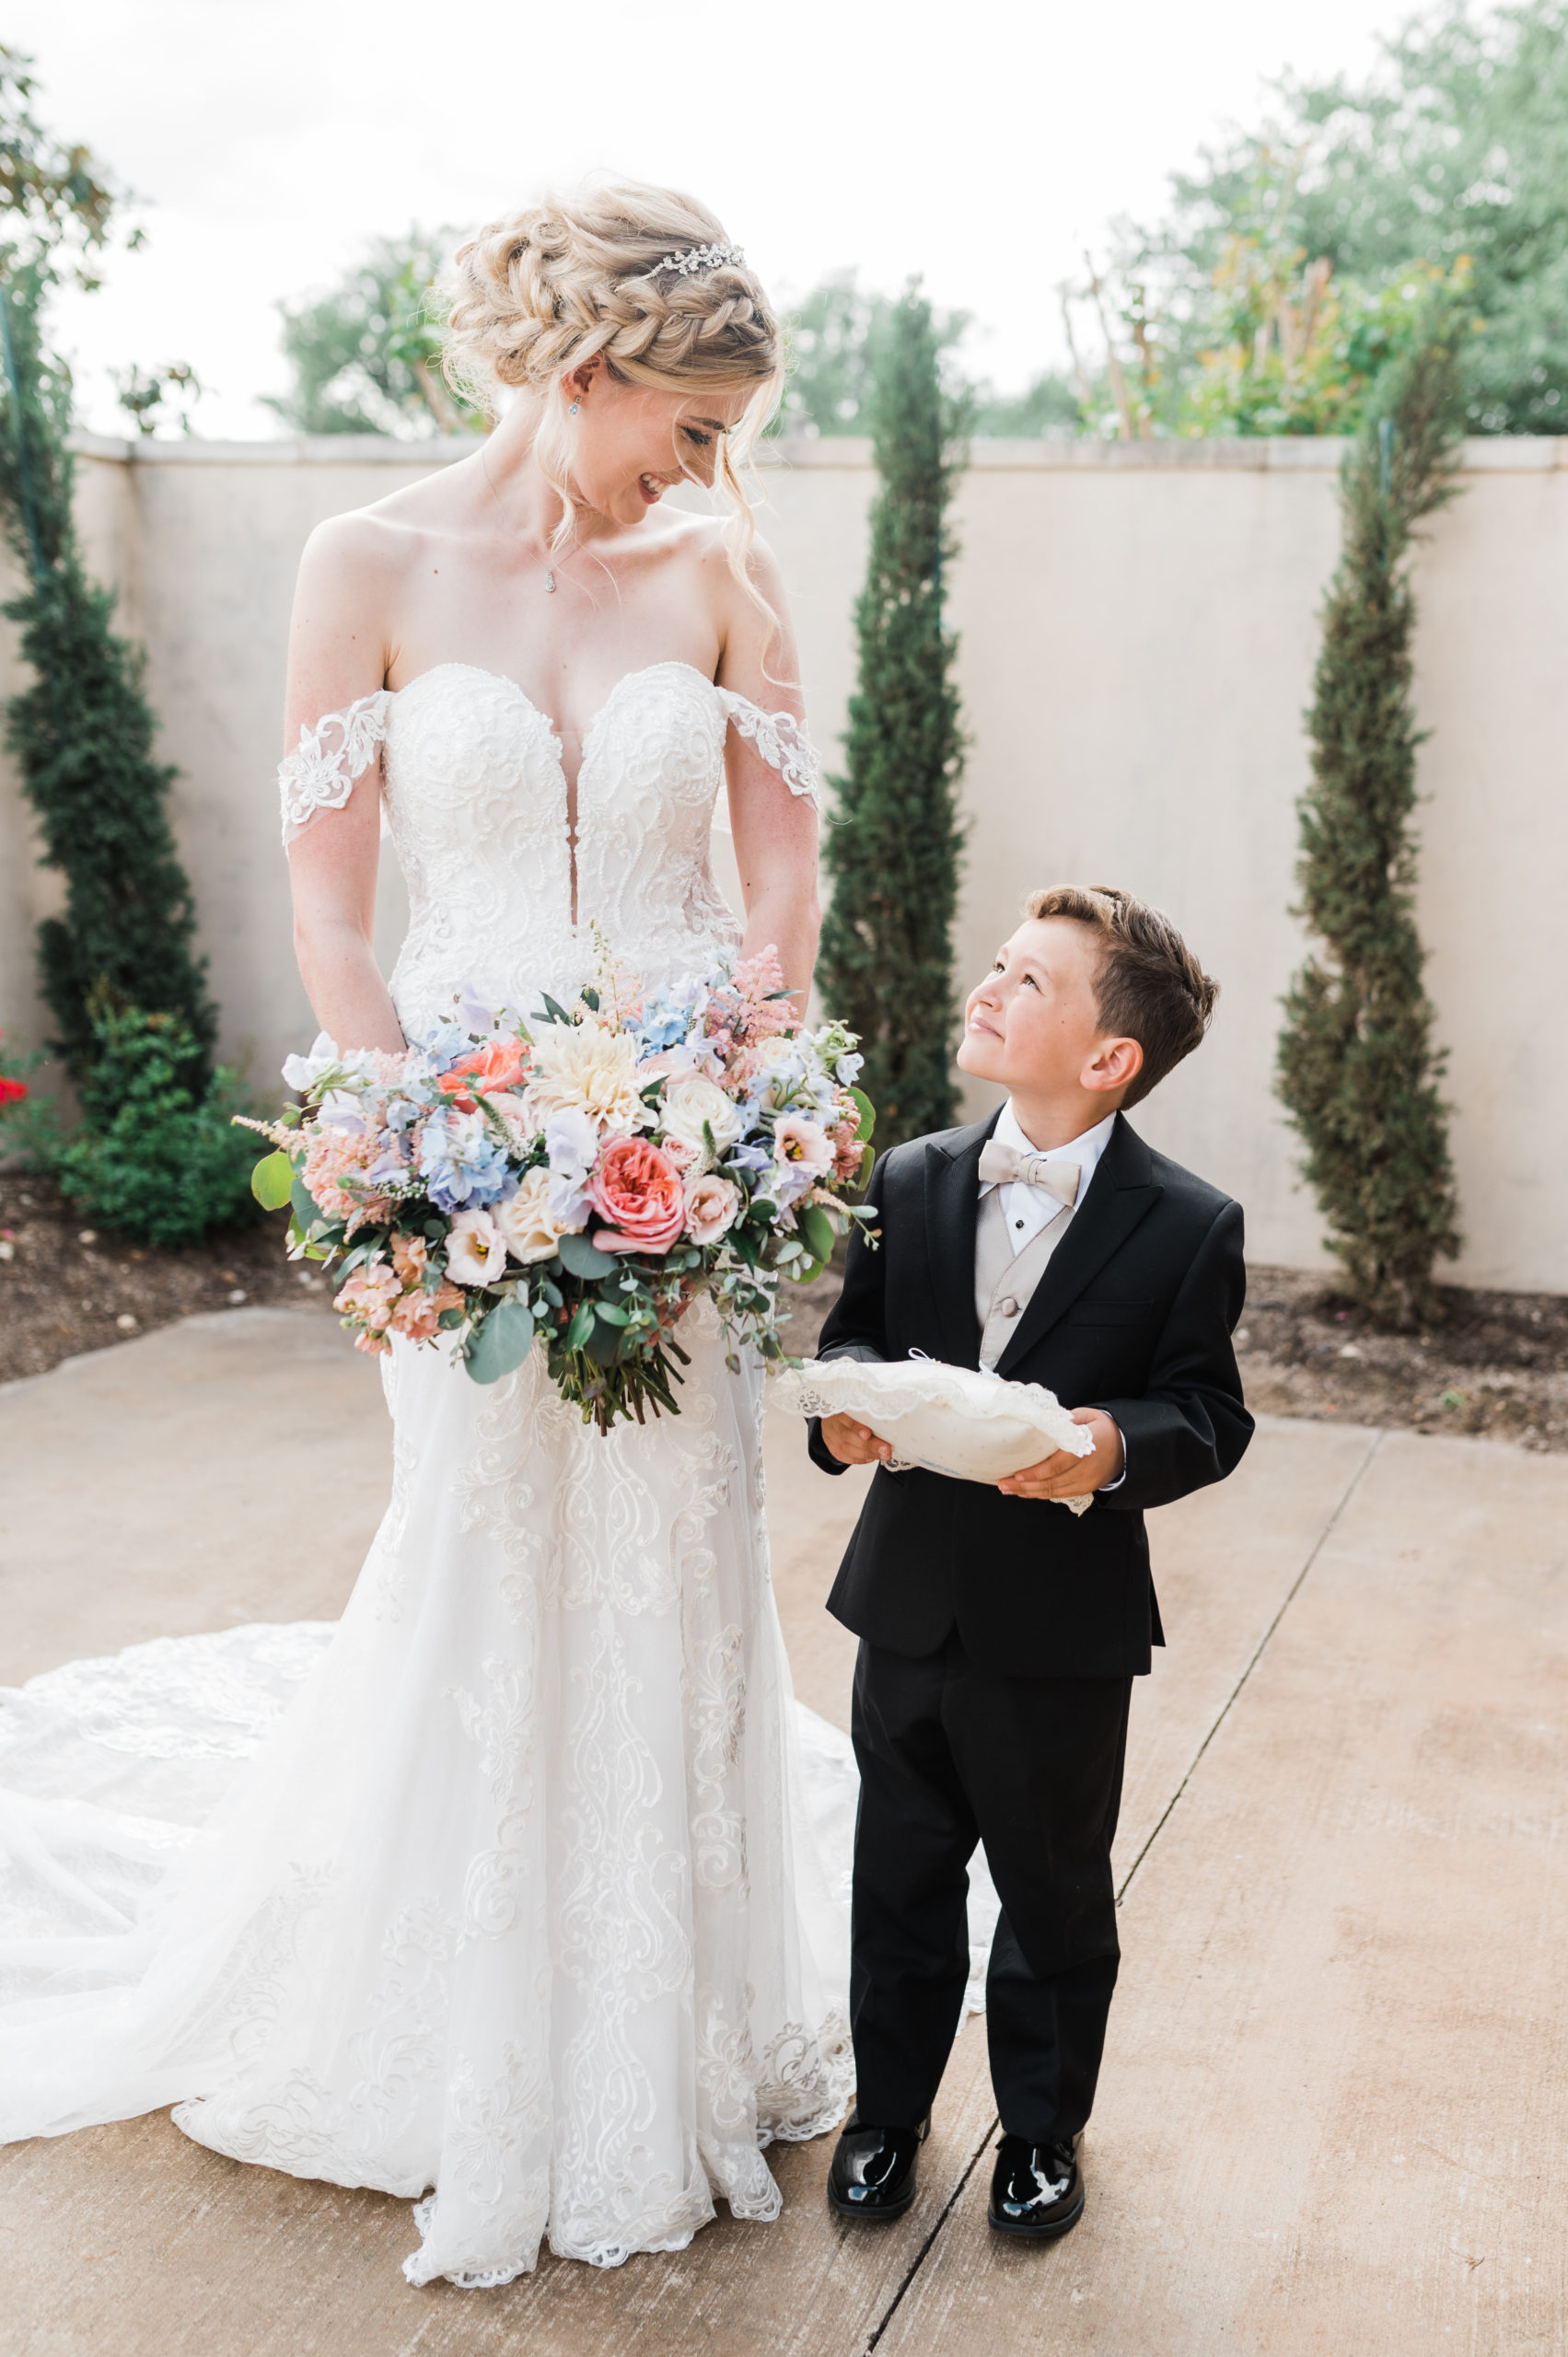 Bridal Portraits with Kids on wedding day